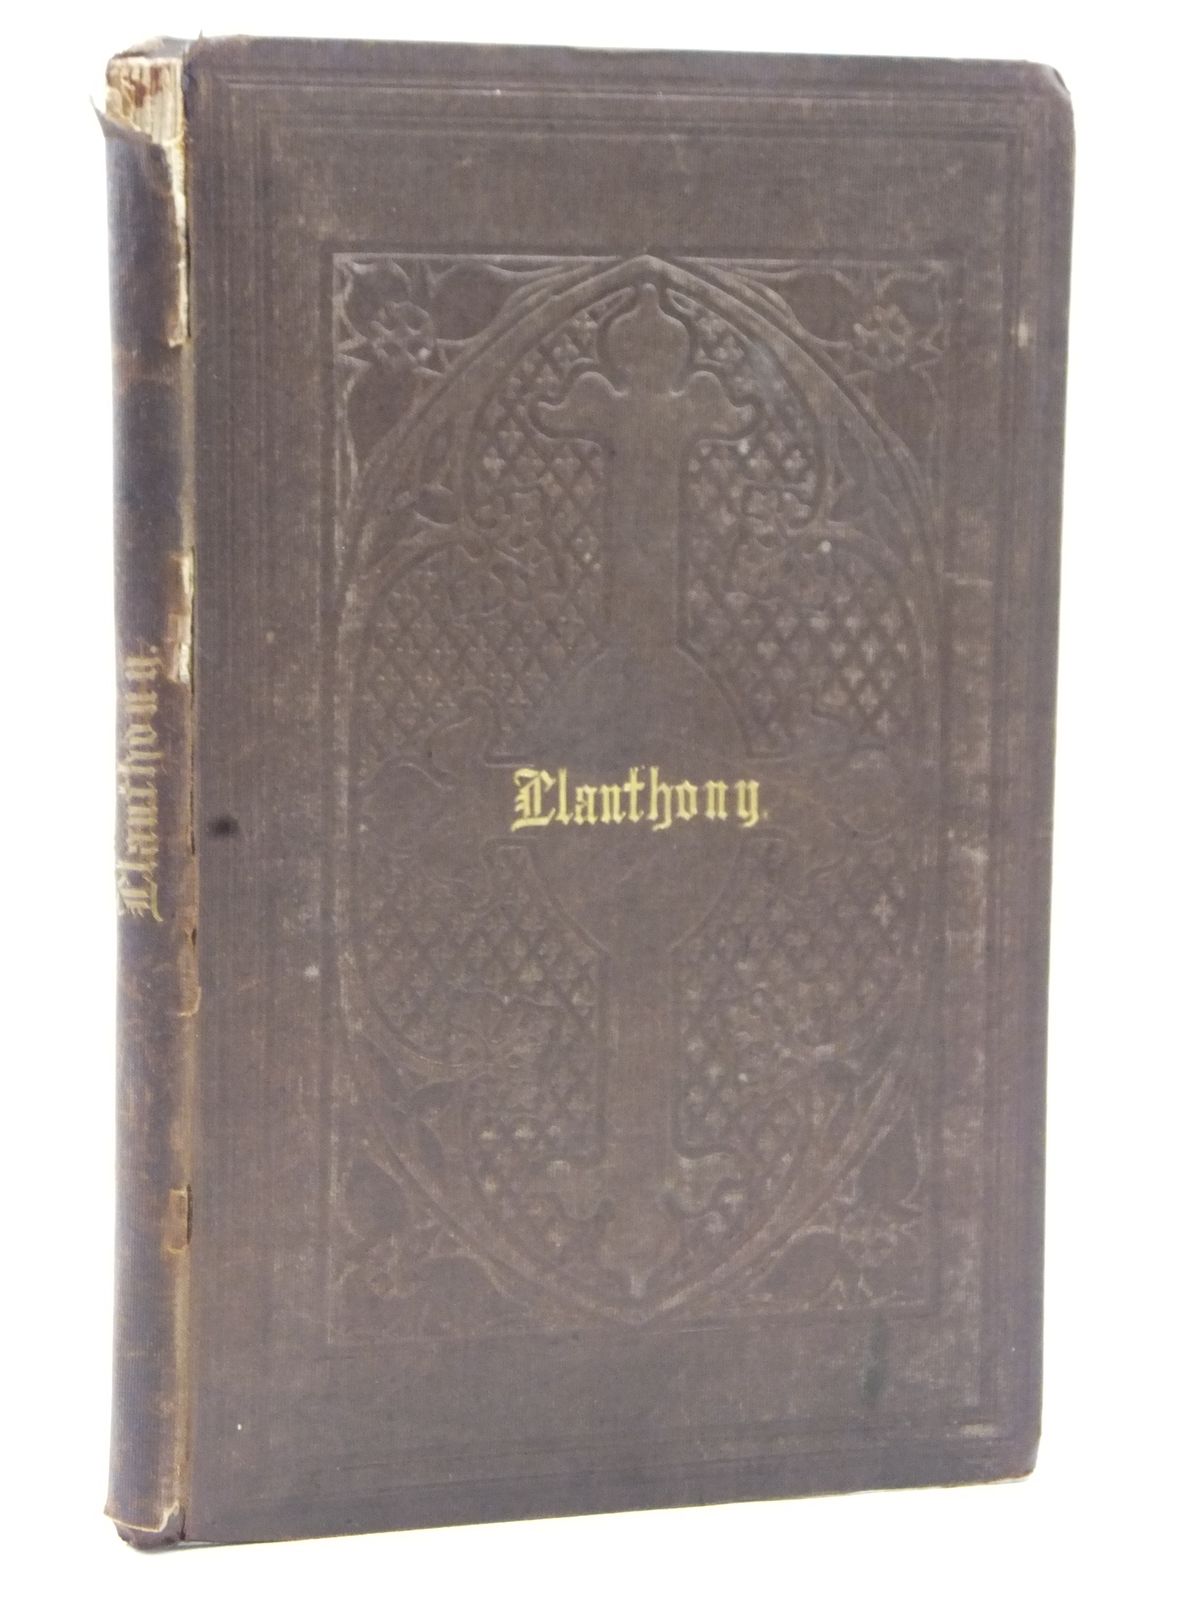 Photo of A POPULAR ACCOUNT OF THE INTERESTING PRIORY OF LLANTHONY NEAR GLOUCESTER written by Clarke, John published by George Bell (STOCK CODE: 2122749)  for sale by Stella & Rose's Books